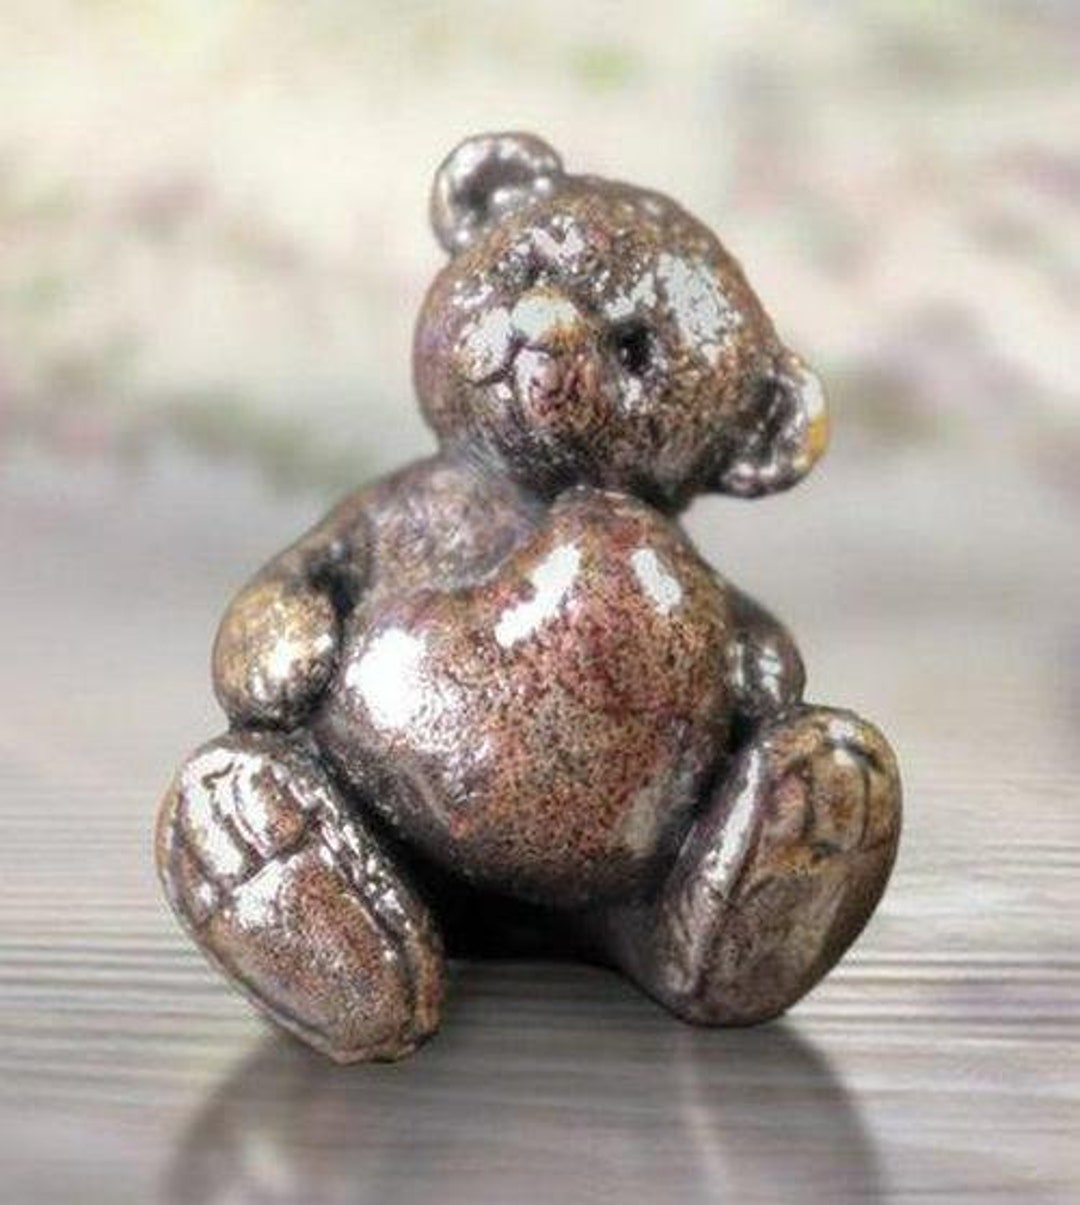 expensive teddy bear statue